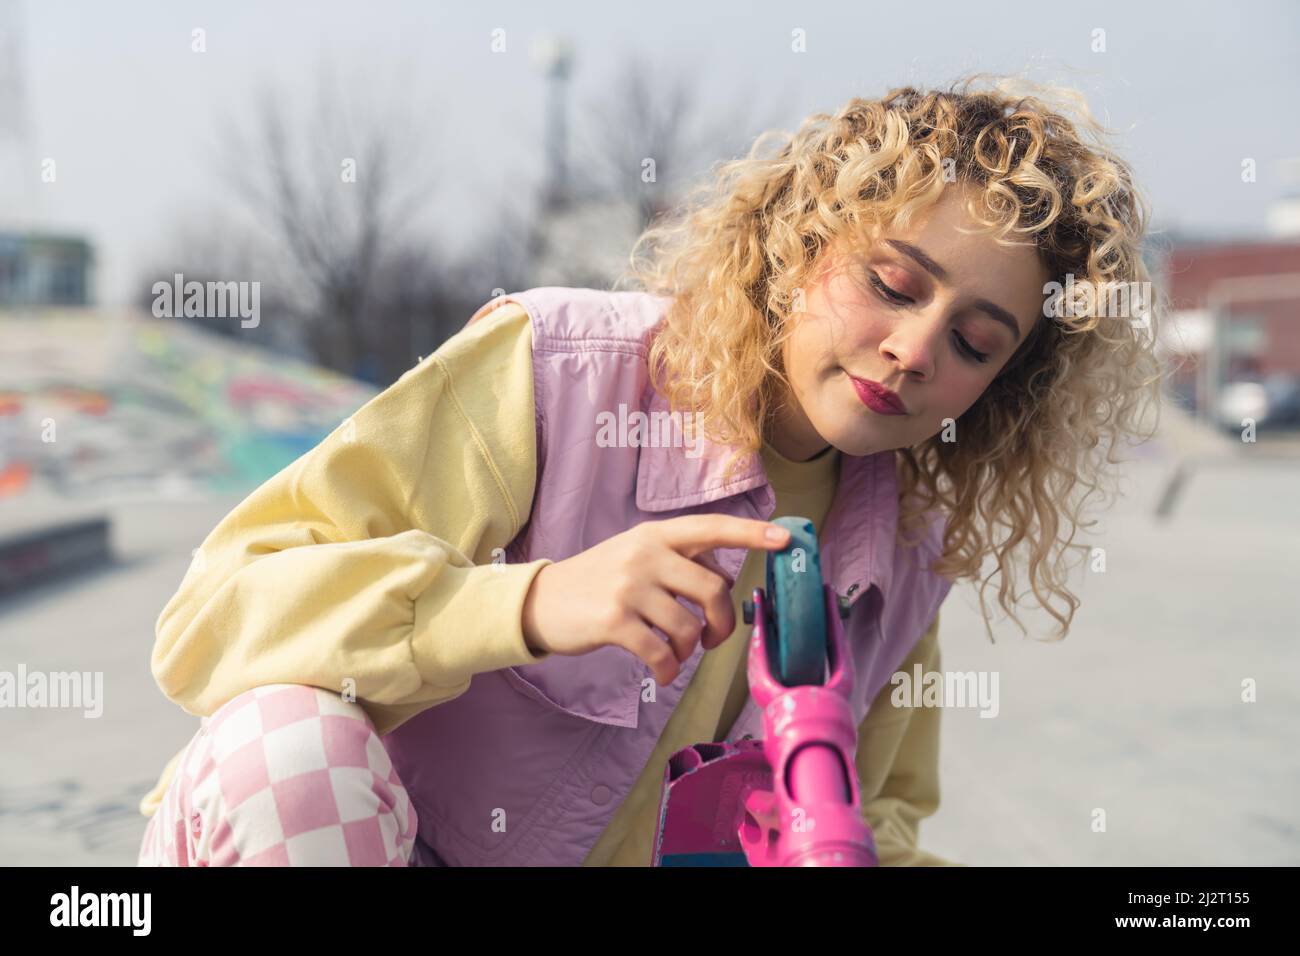 Young blond curly haired woman posing with a pink scooter, looking down and touching the wheel, portrait copy space sports ground background . High quality photo Stock Photo